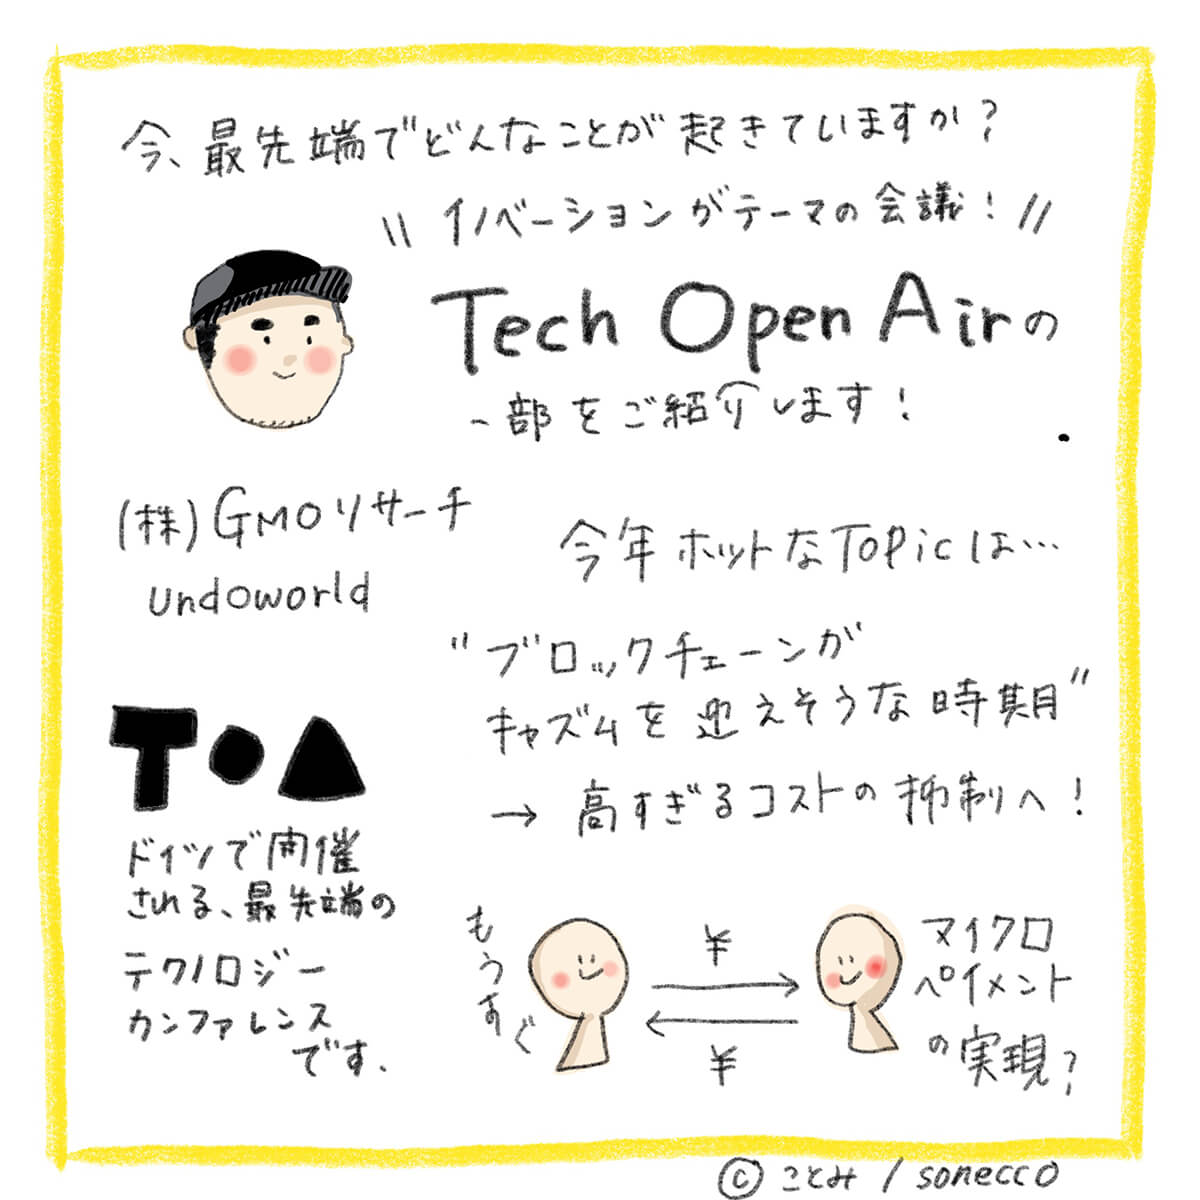 Tech Open Air の一部をご紹介します！